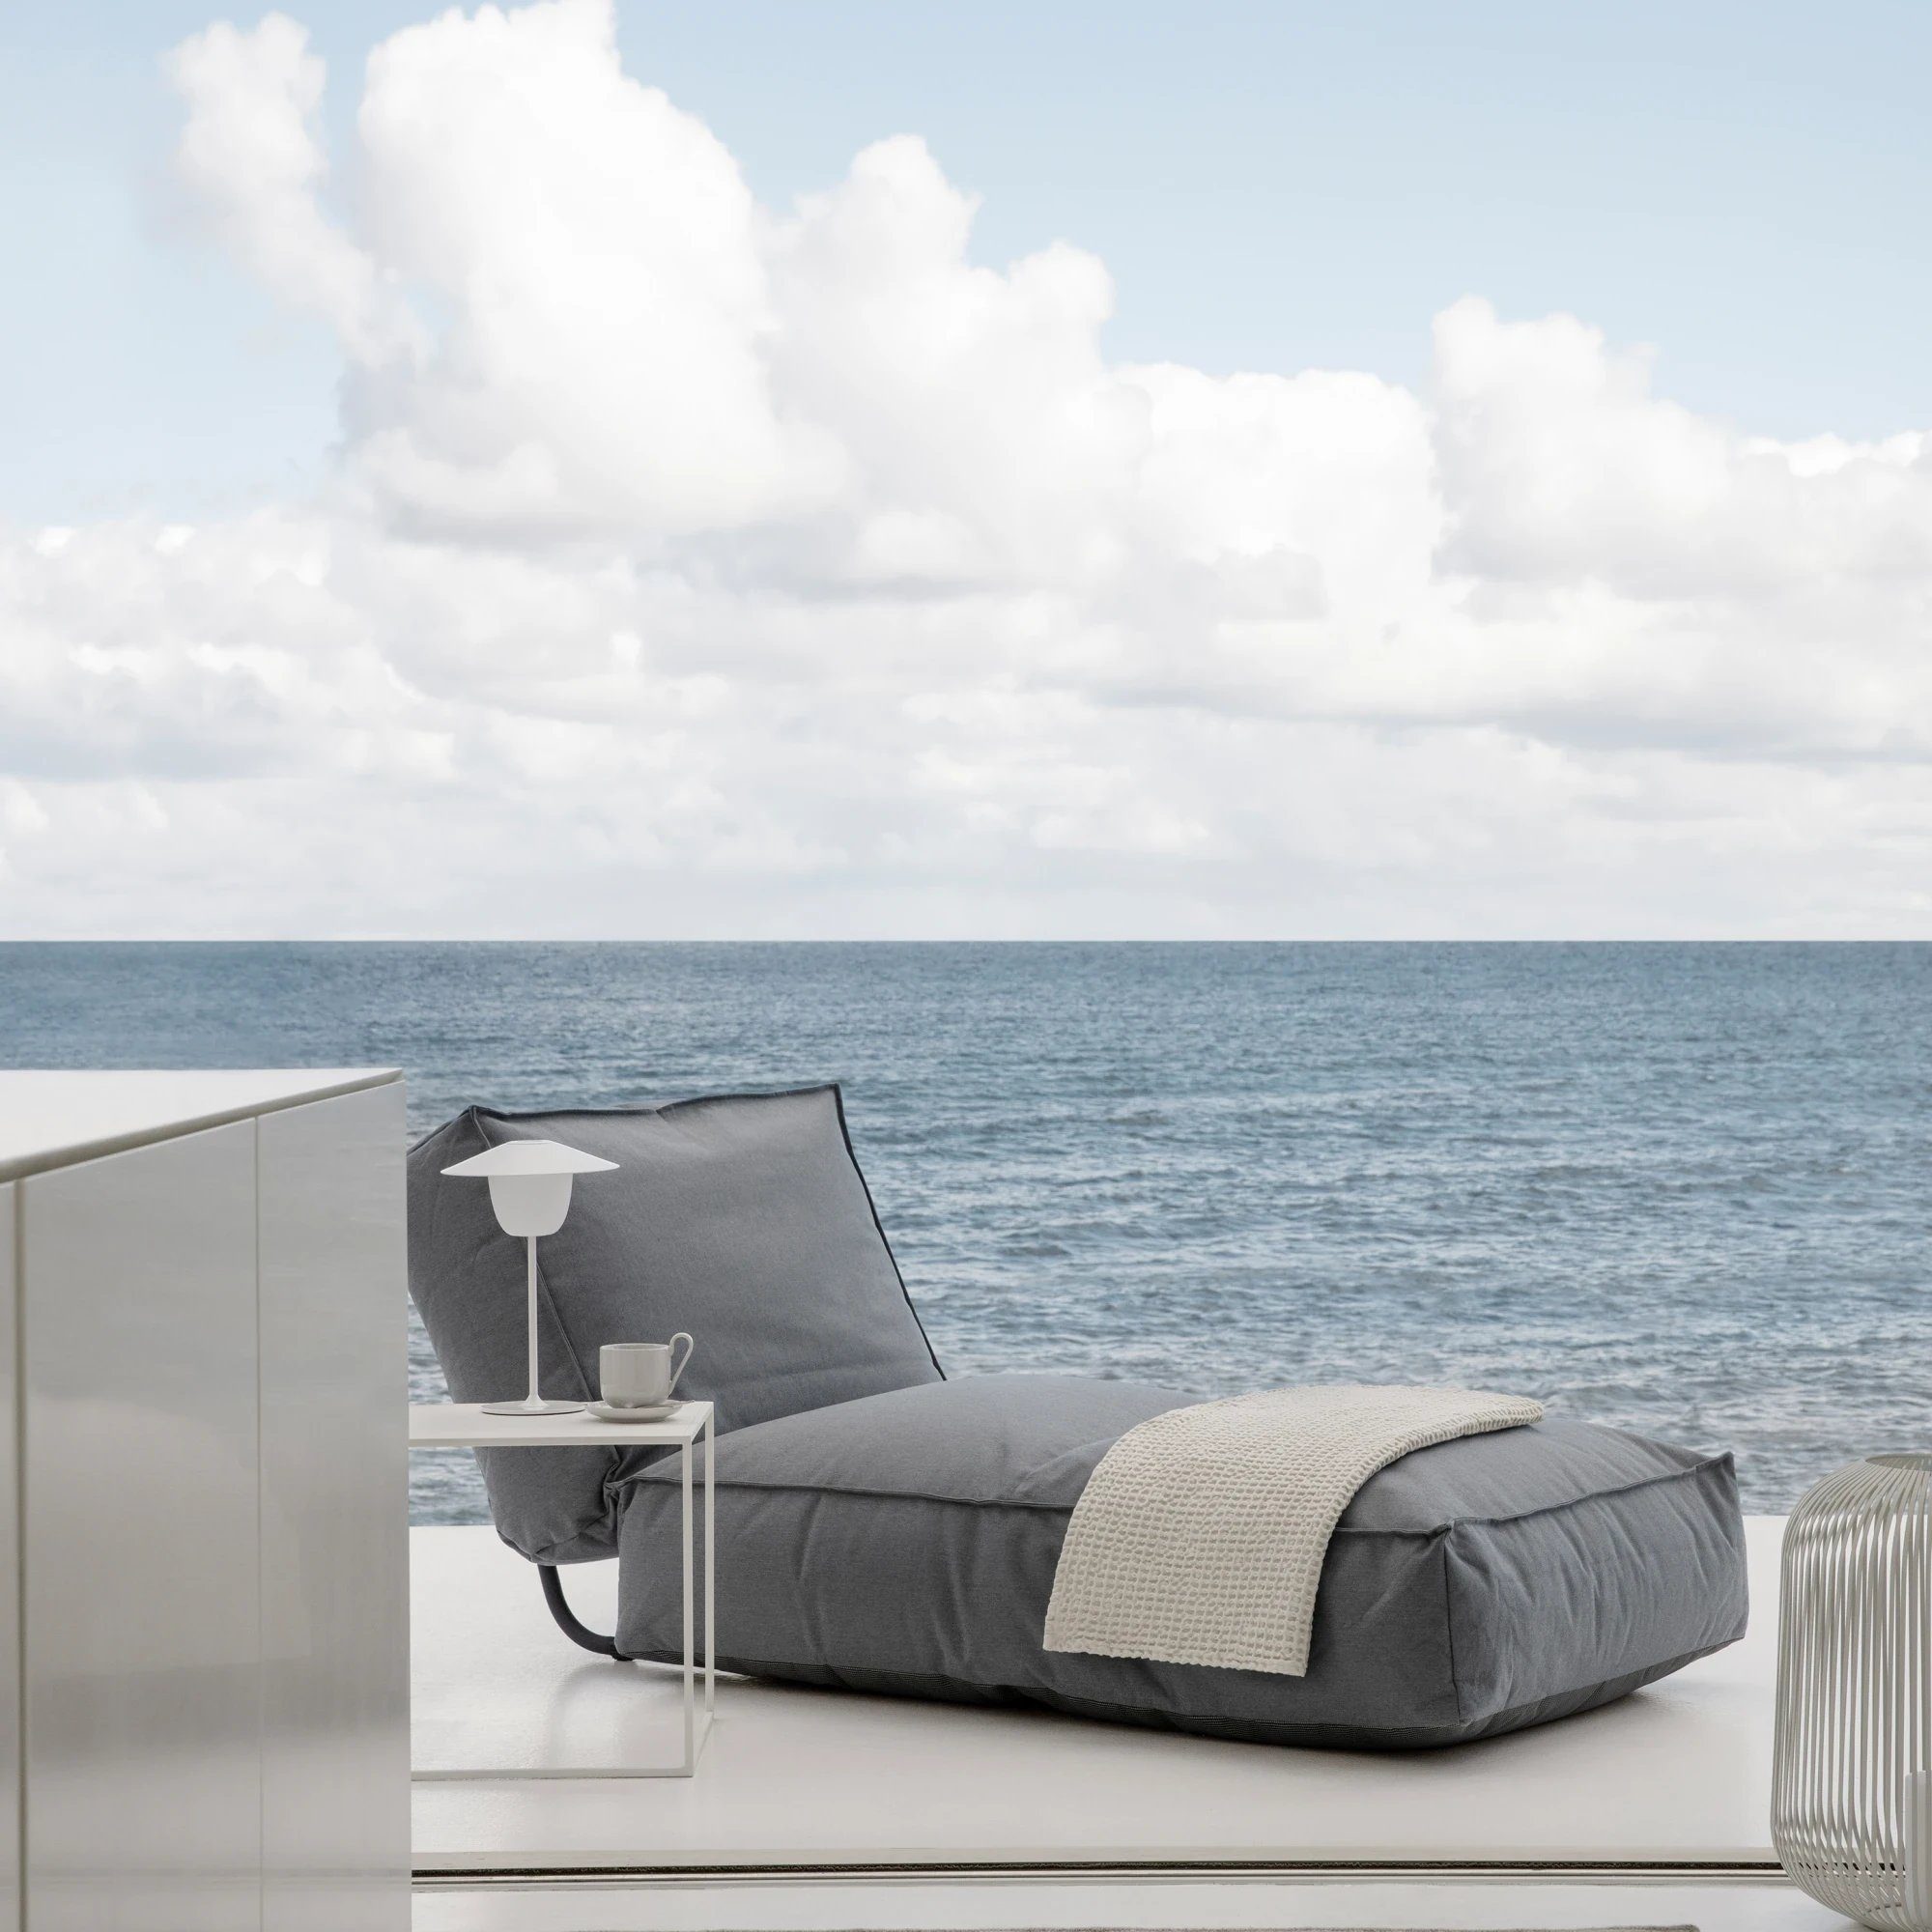 blomus Loungesofa - Lounger Blomus Earth STAY